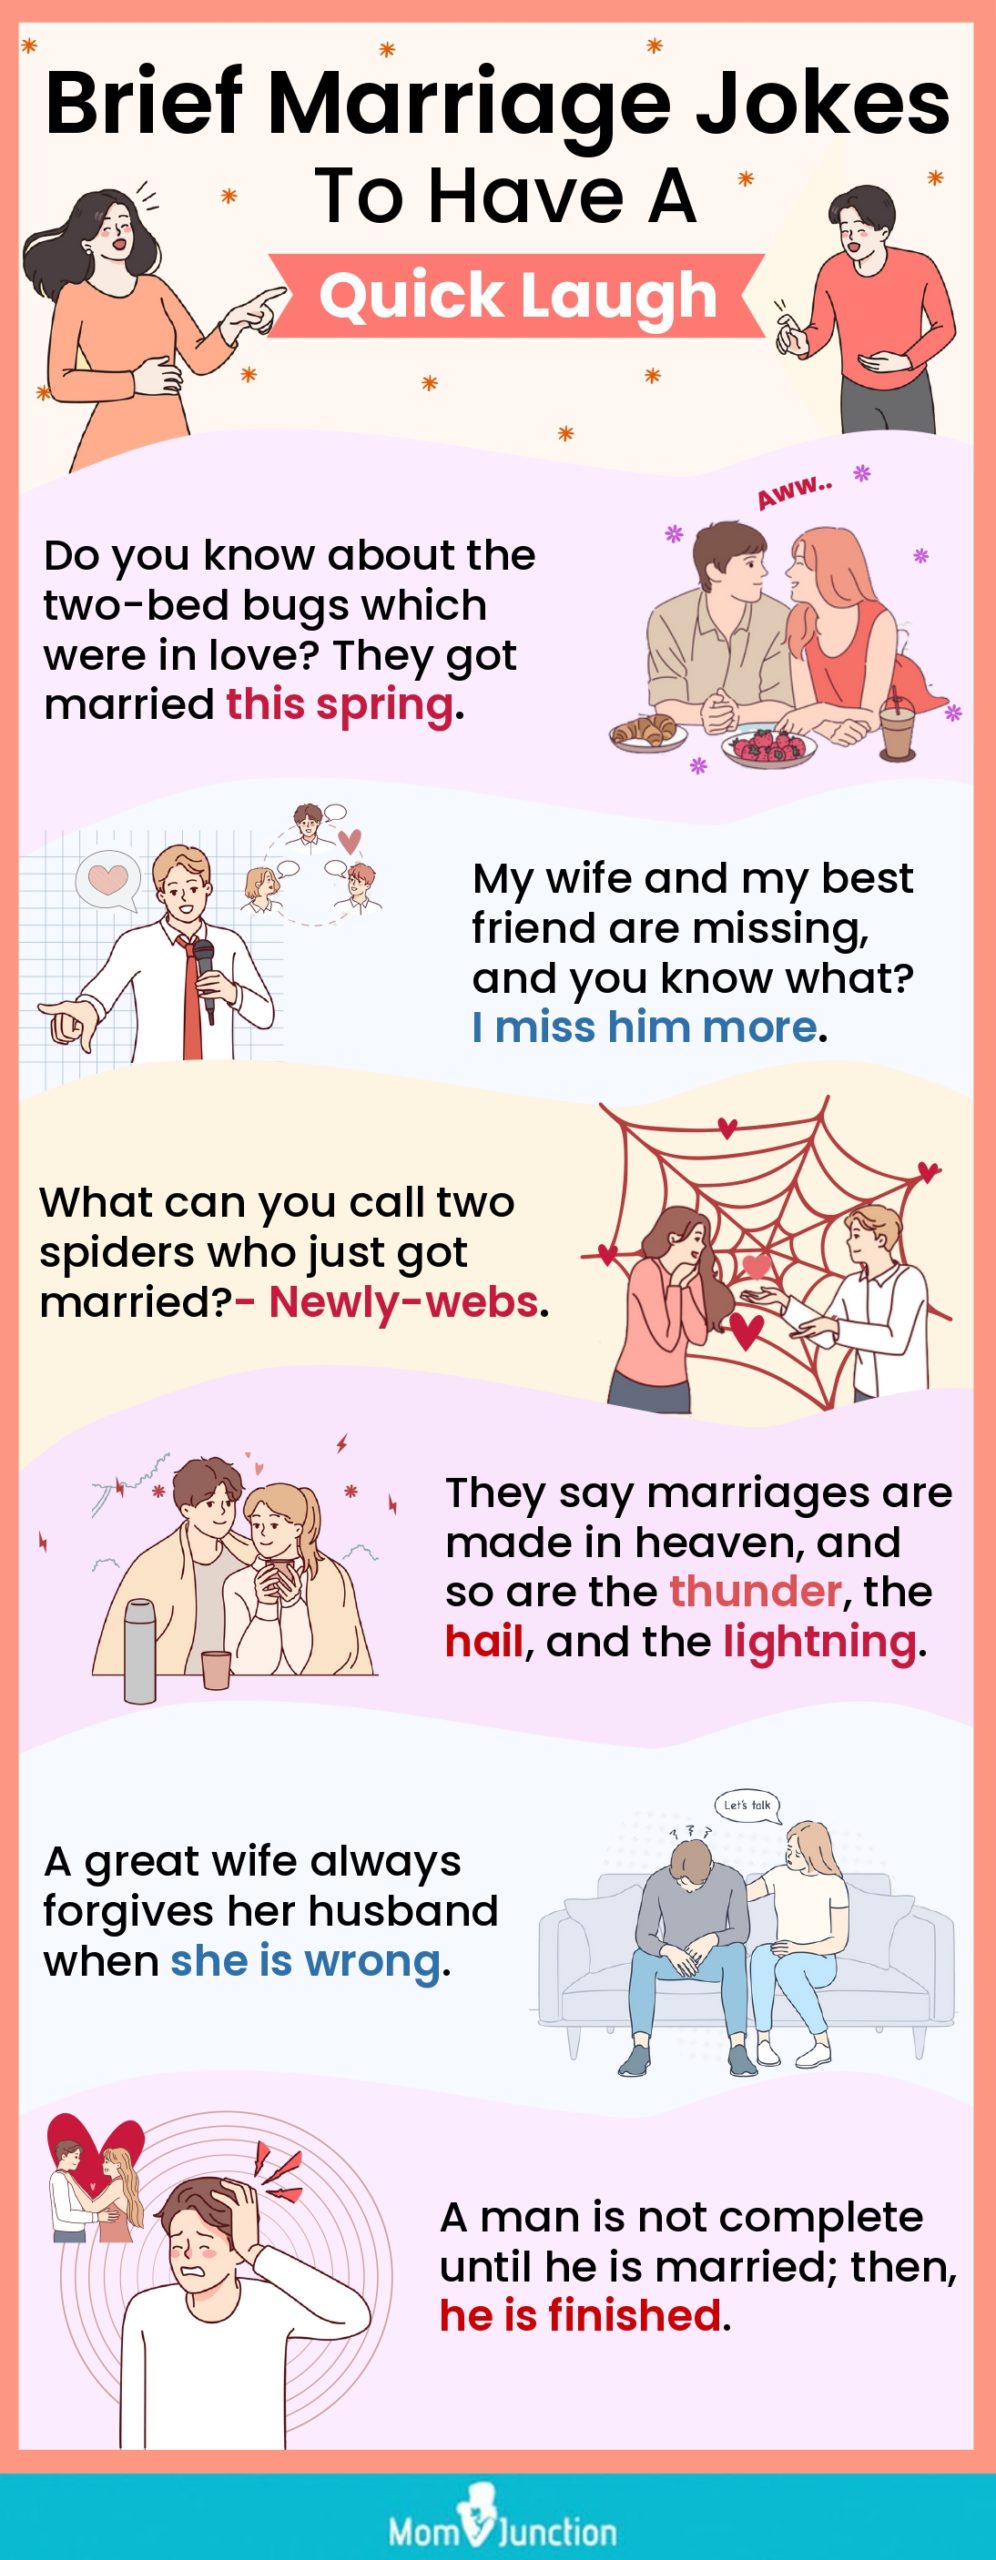 brief marriage jokes to have a quick laugh (infographic)